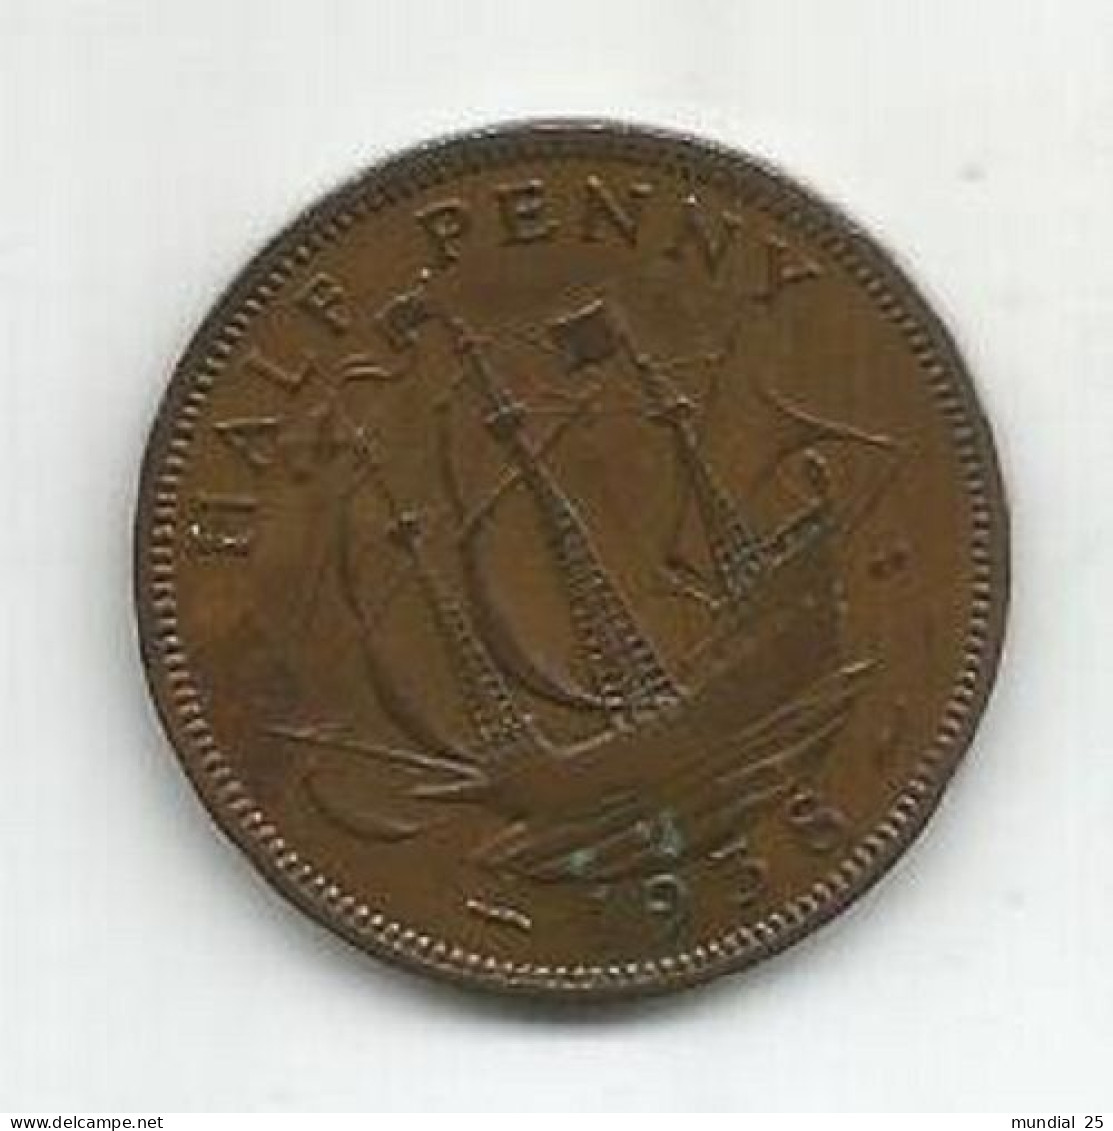 GREAT BRITAIN 1/2 PENNY 1938 - C. 1/2 Penny